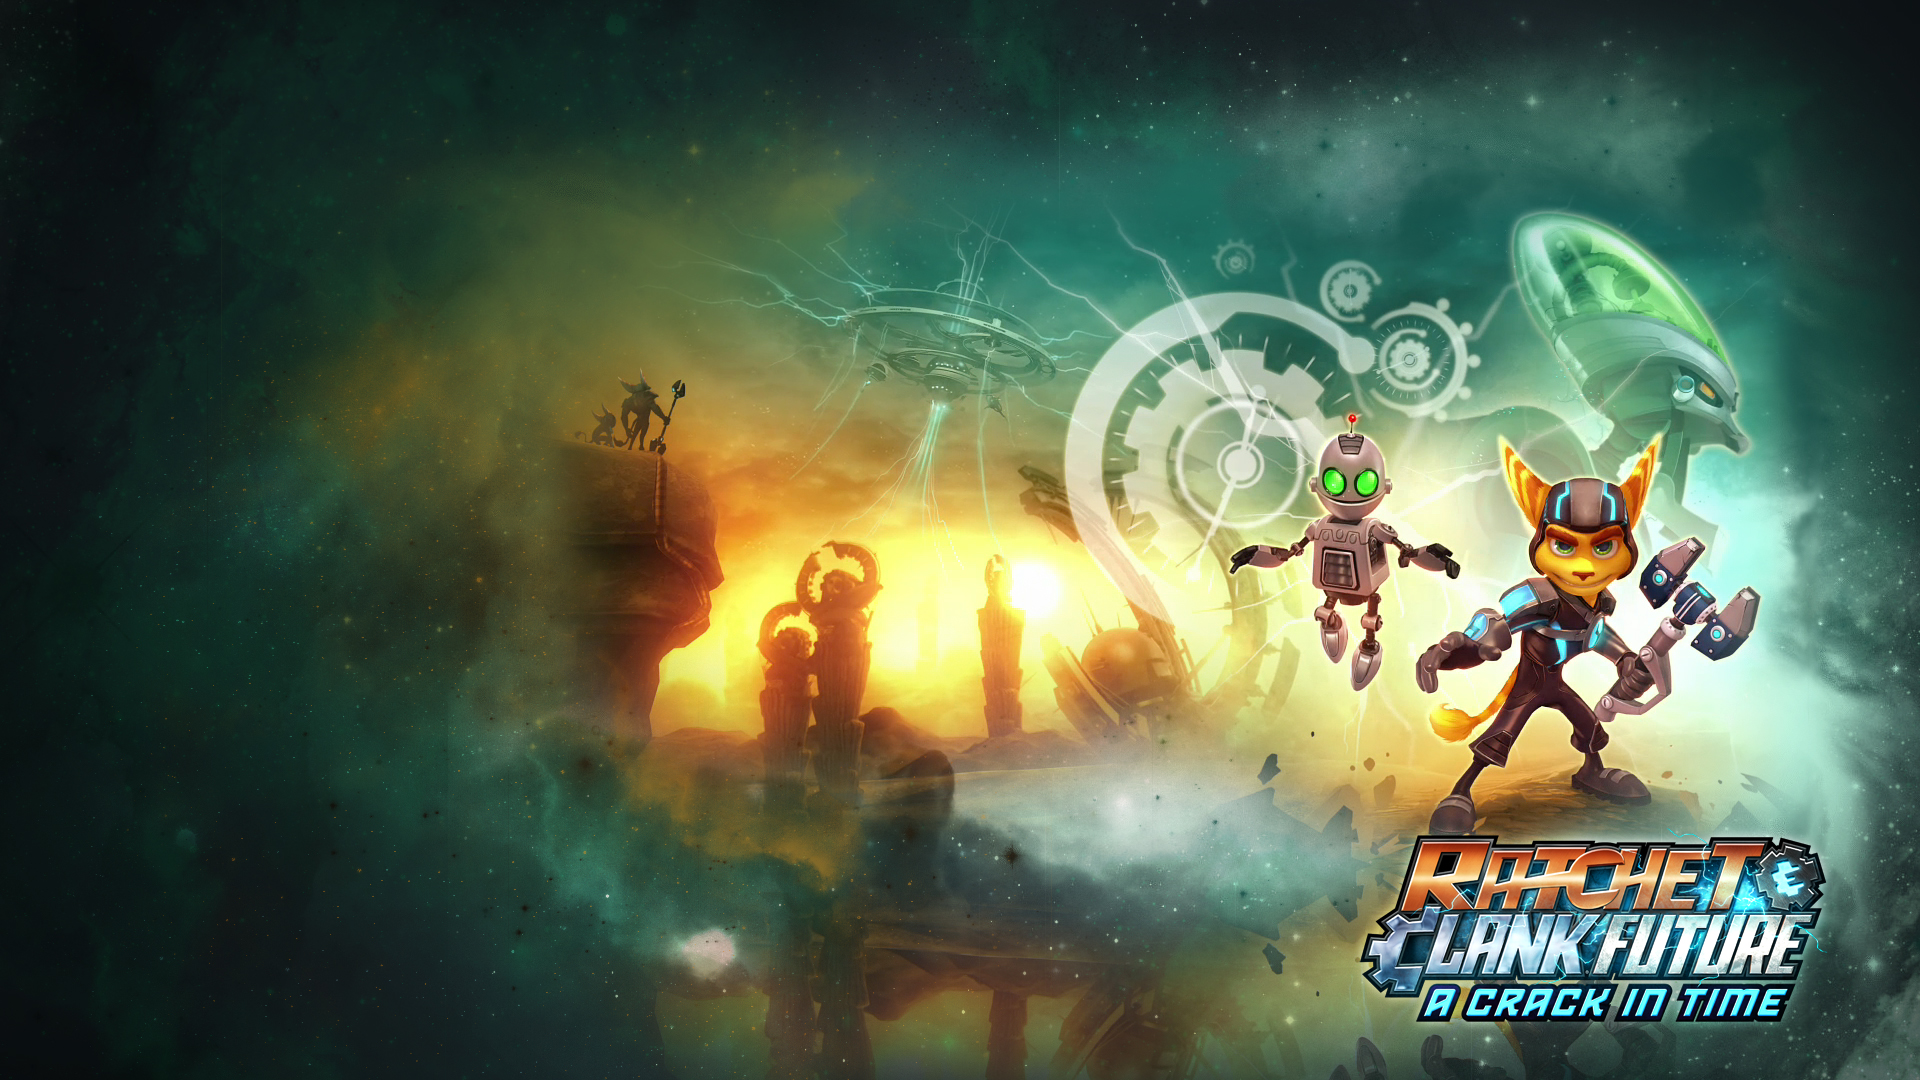 Ratchet & Clank Future: A Crack In Time #16